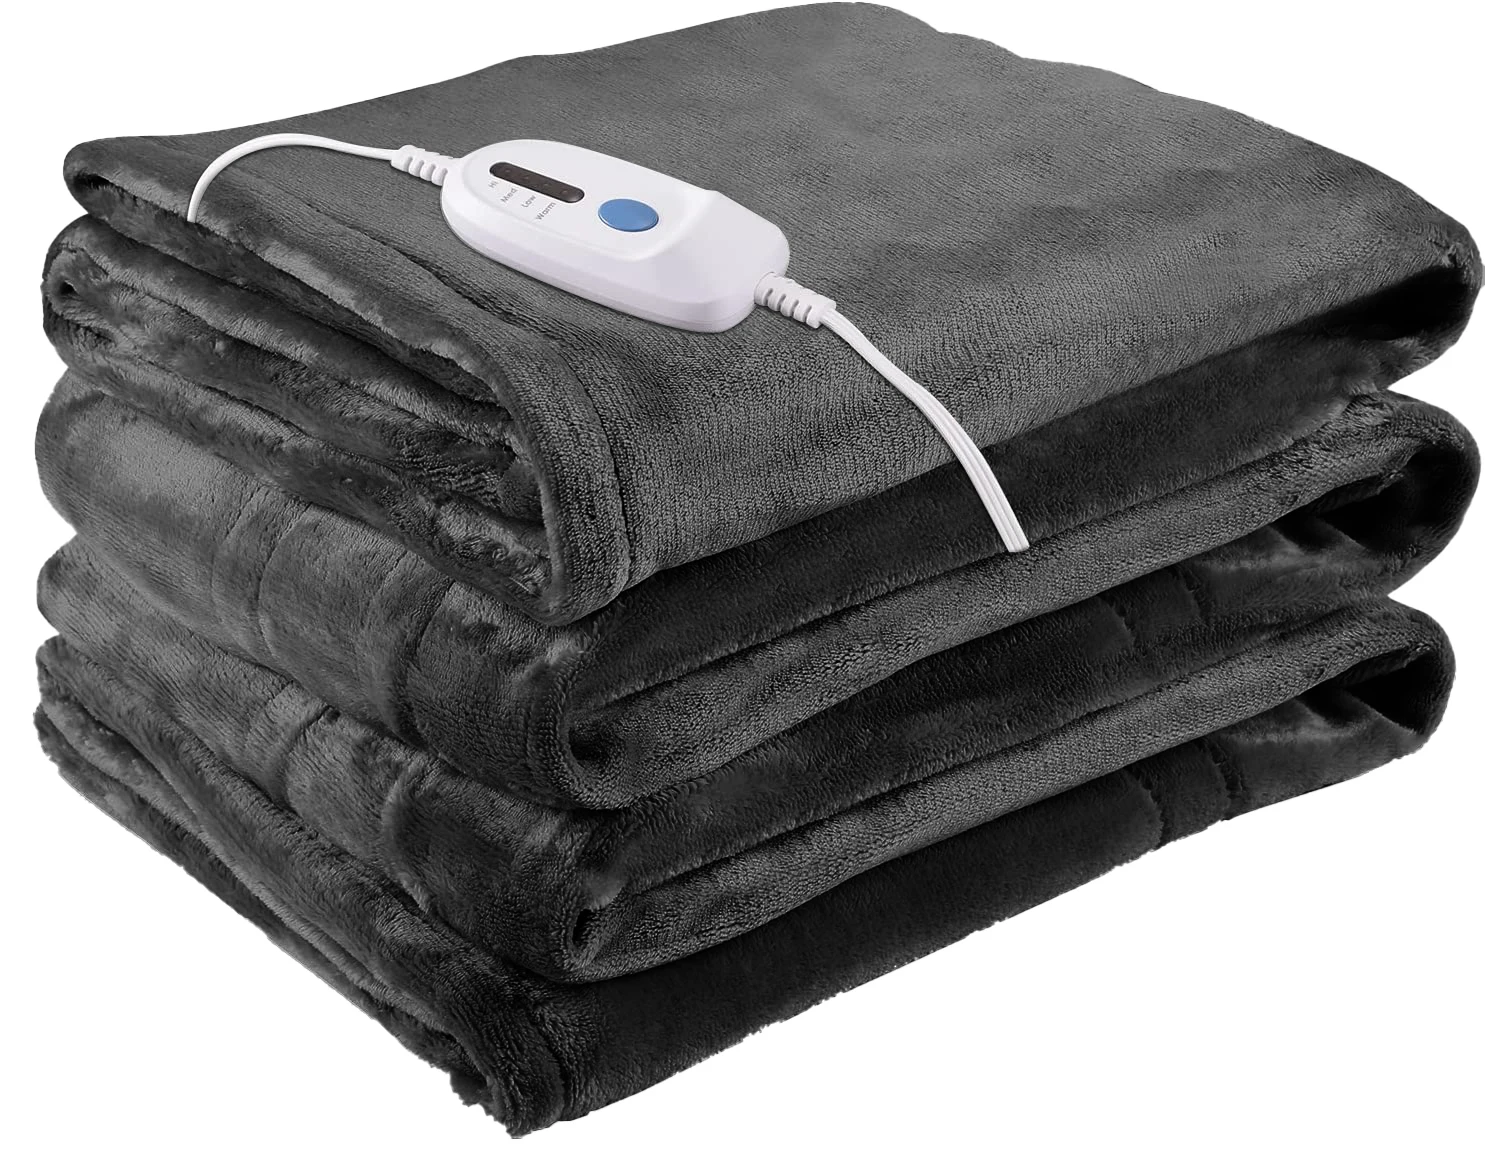 120V 4 Heat Setting 10 hours Auto Off Soft cozy Flannel  Electric Heated Throw Blanket (1600761431334)